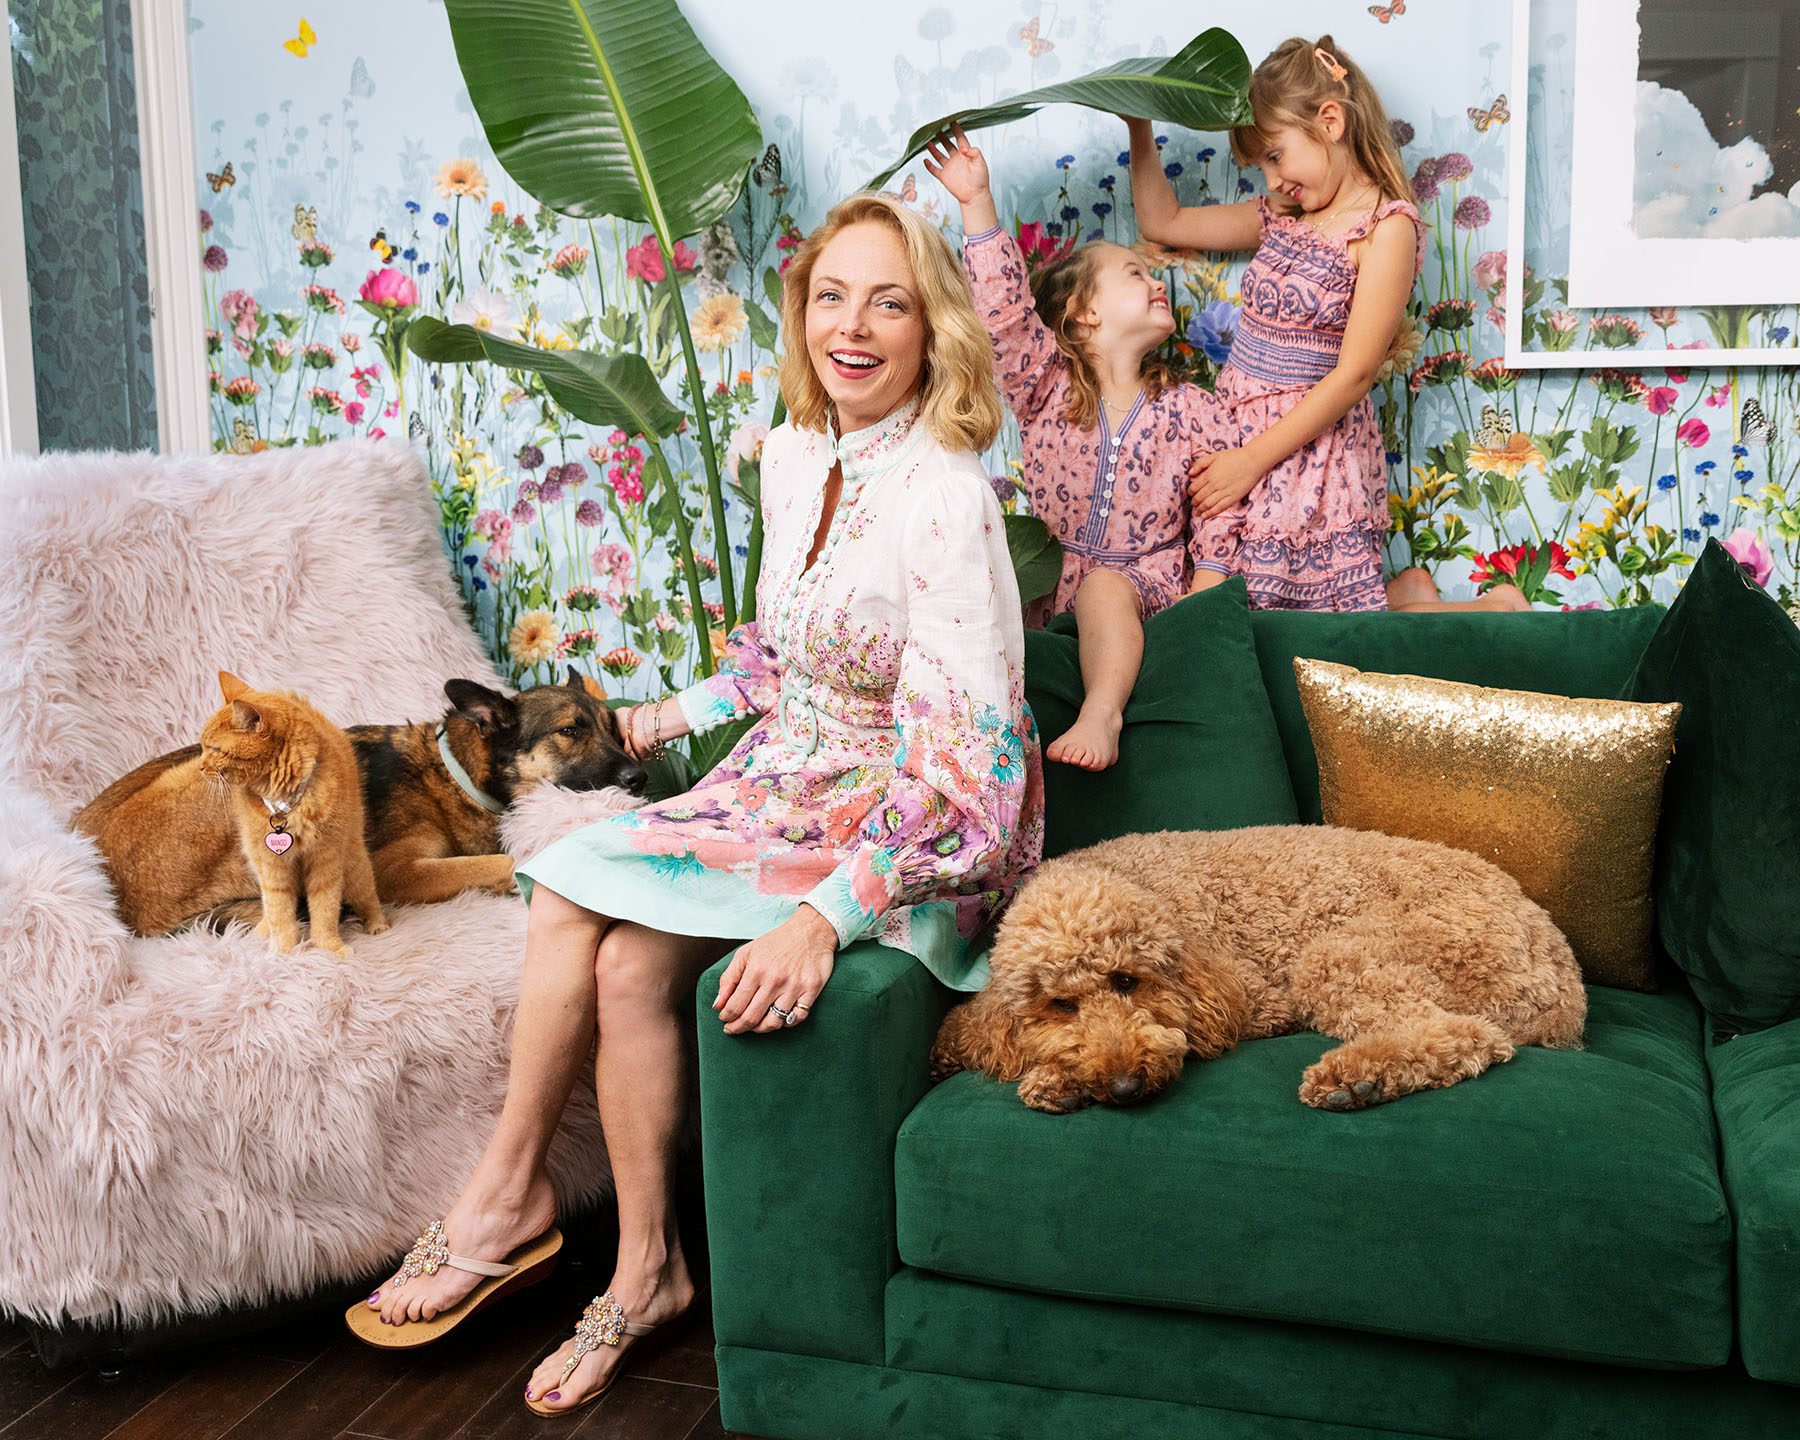 Louisette Geiss poses in her living room. On her left an orange cat and a dog lay on a fluffly couch. Behind her, her two daughters play with a plant. On her right, another dog takes a nap on a velvet couch.